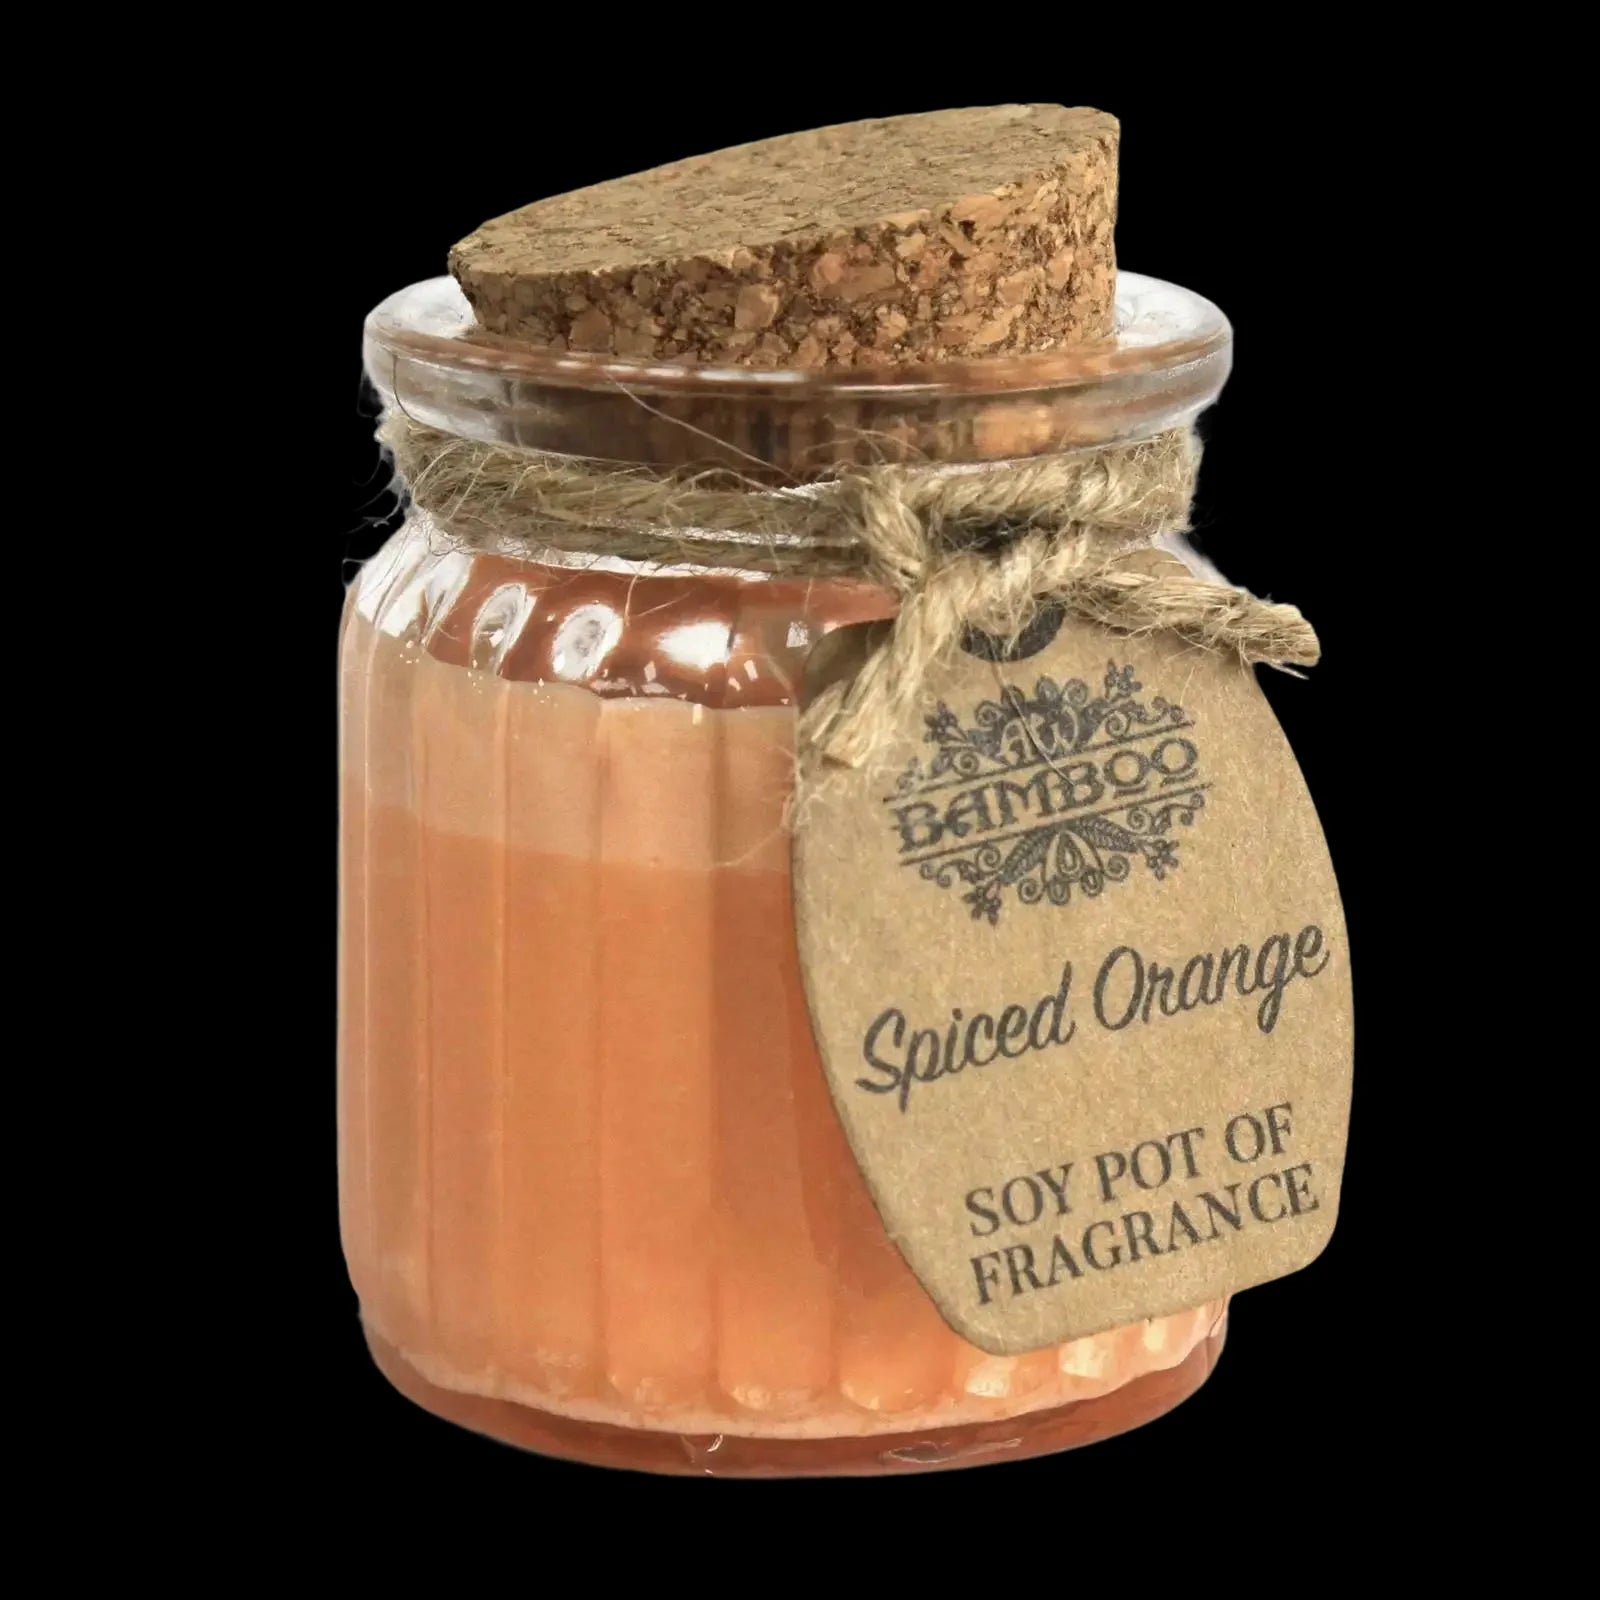 Spiced Orange Soy Pot Of Fragrance Candles - Ancient Wisdom